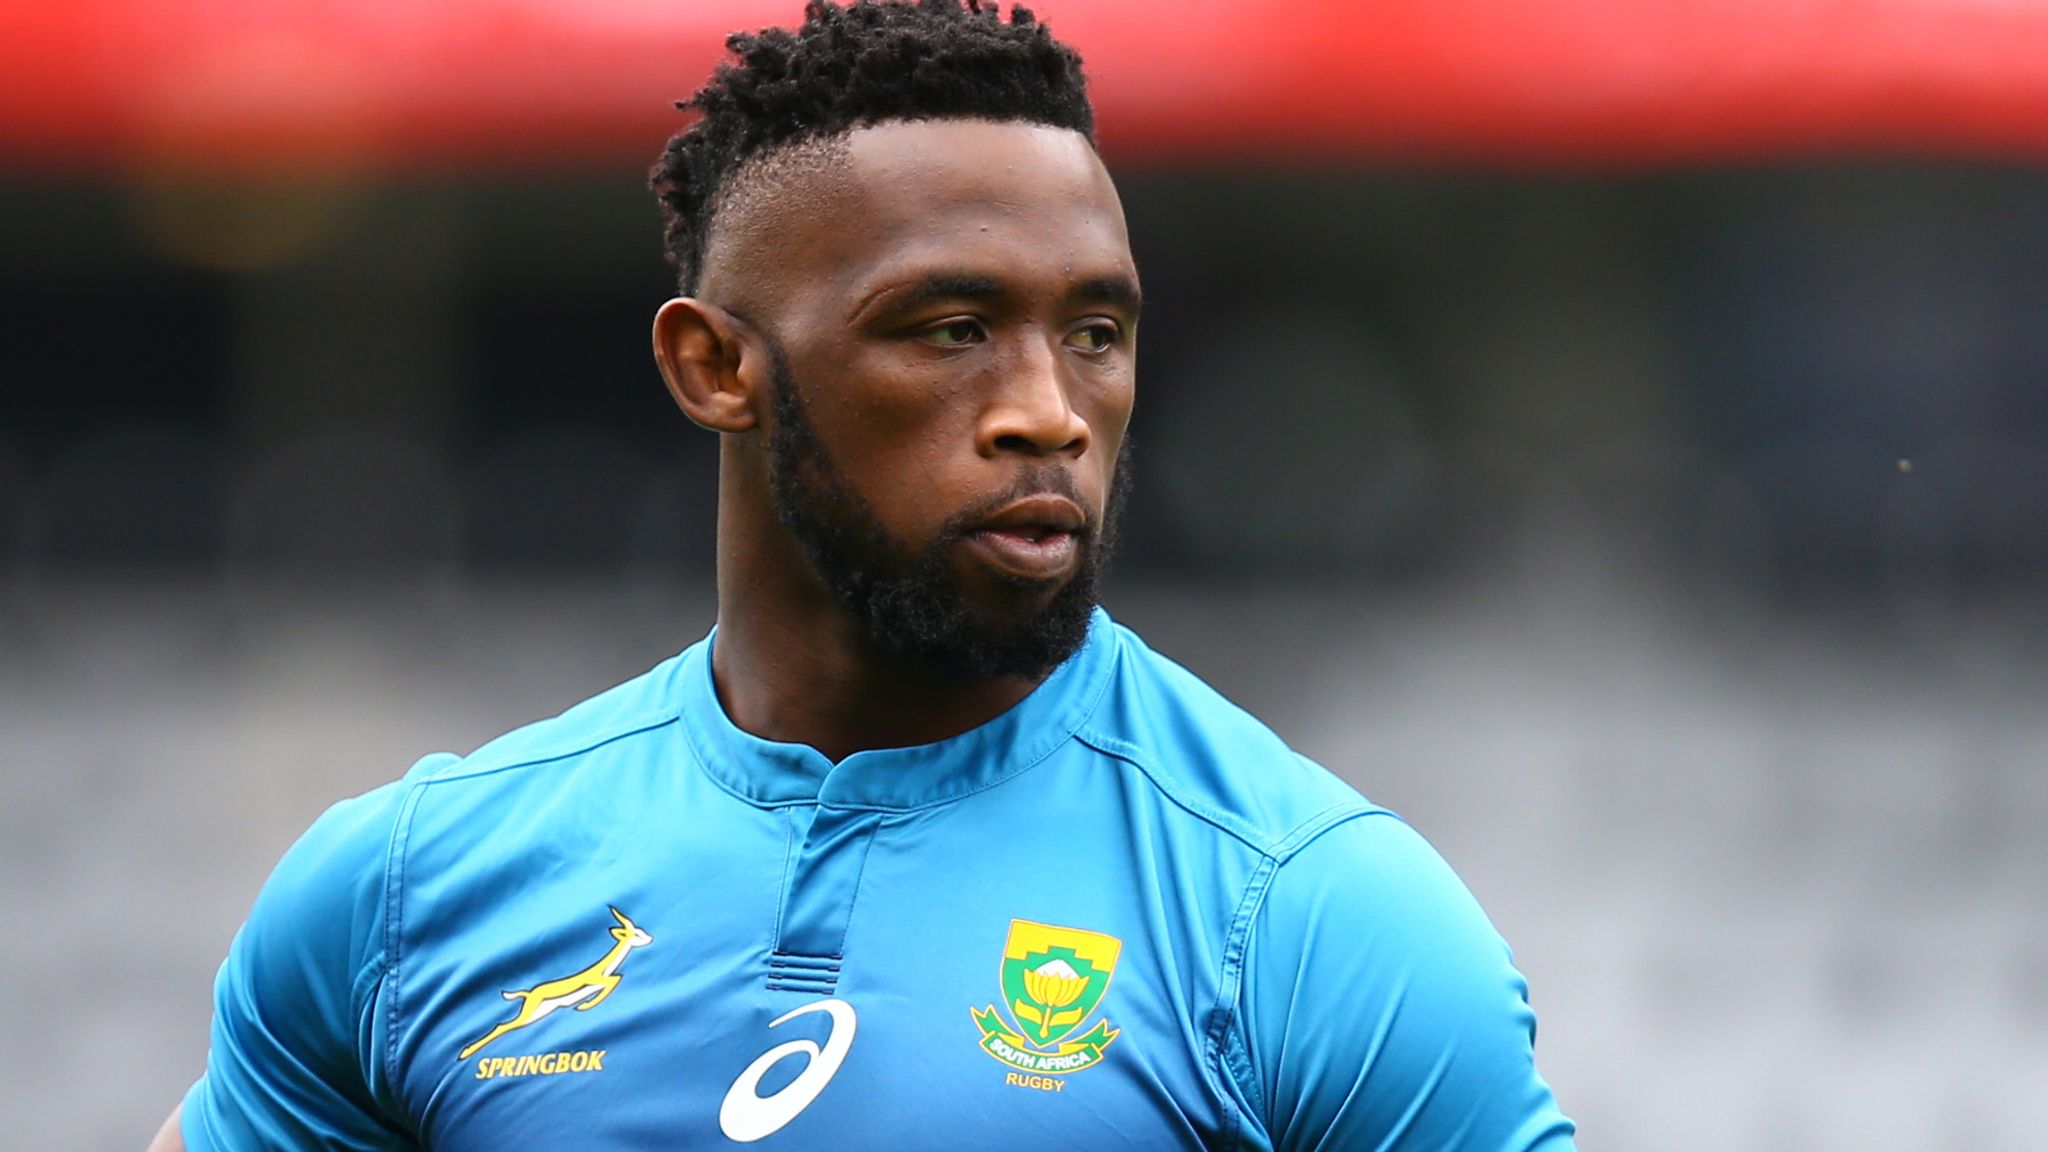 Springboks name team for Georgia game, with Siya Kolisi to lead side in first Test since World Cup final Rugby Union News Sky Sports